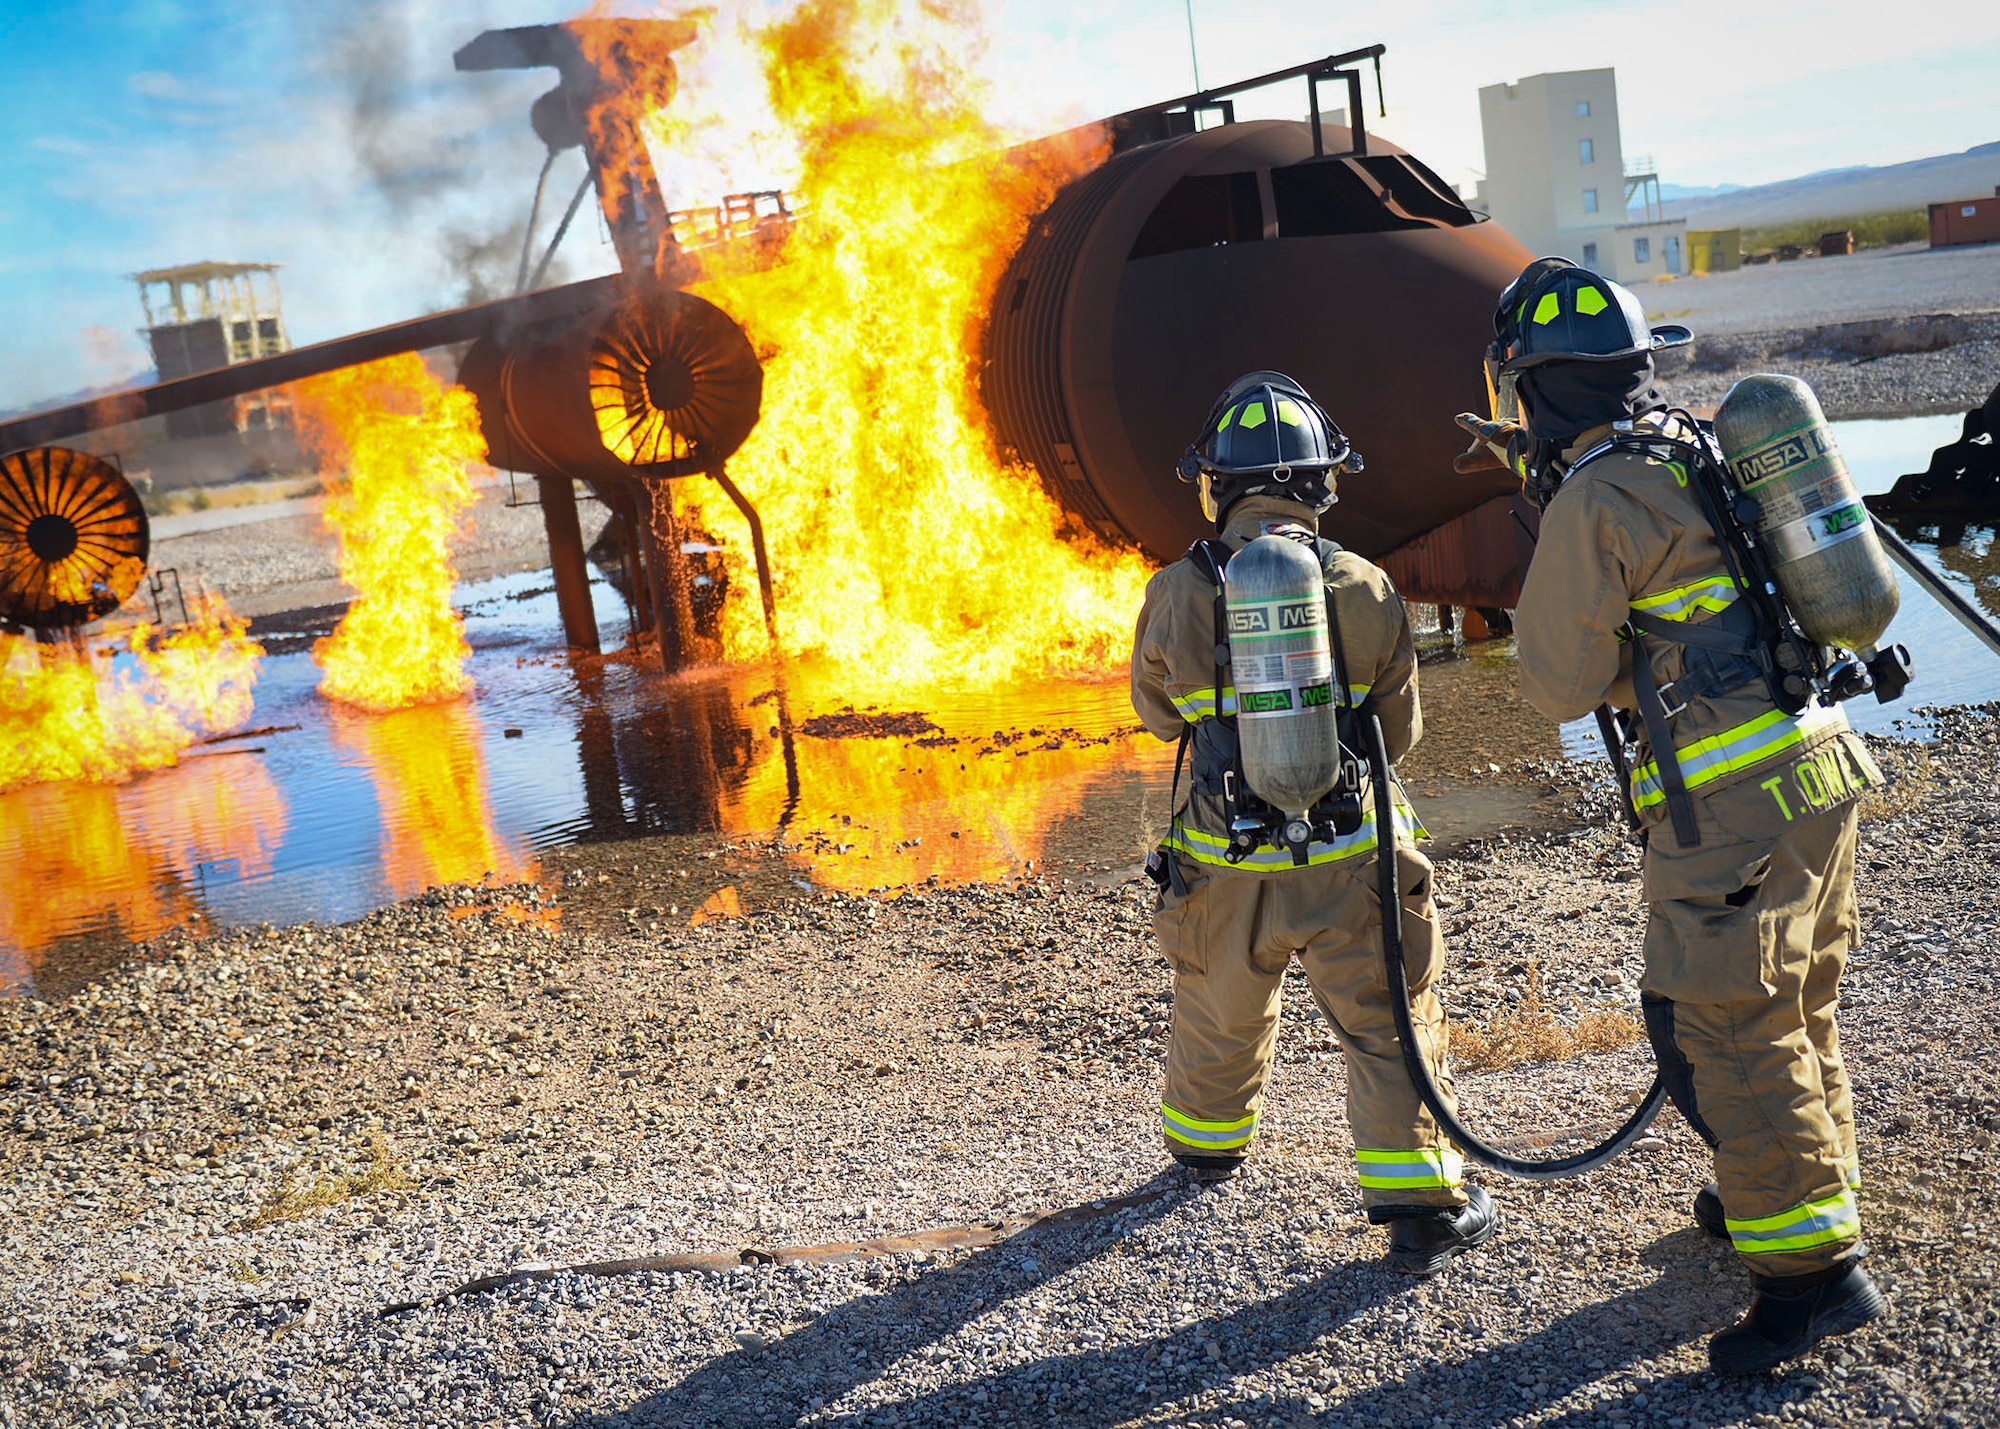 Airman Nigea Goodwin and Senior Airman Trevor Owens, both 99th Civil Engineer Squadron firefighters, approach a simulated aircraft fire at the fire department training area on Nellis Air Force Base, Nev., Oct 23, 2018. Real-life jet fuel can burn at over 1,800 degrees Fahrenheit so propane is used during the training for safety purposes. (U.S. Air Force photo by Airman 1st Class Bryan T. Guthrie)